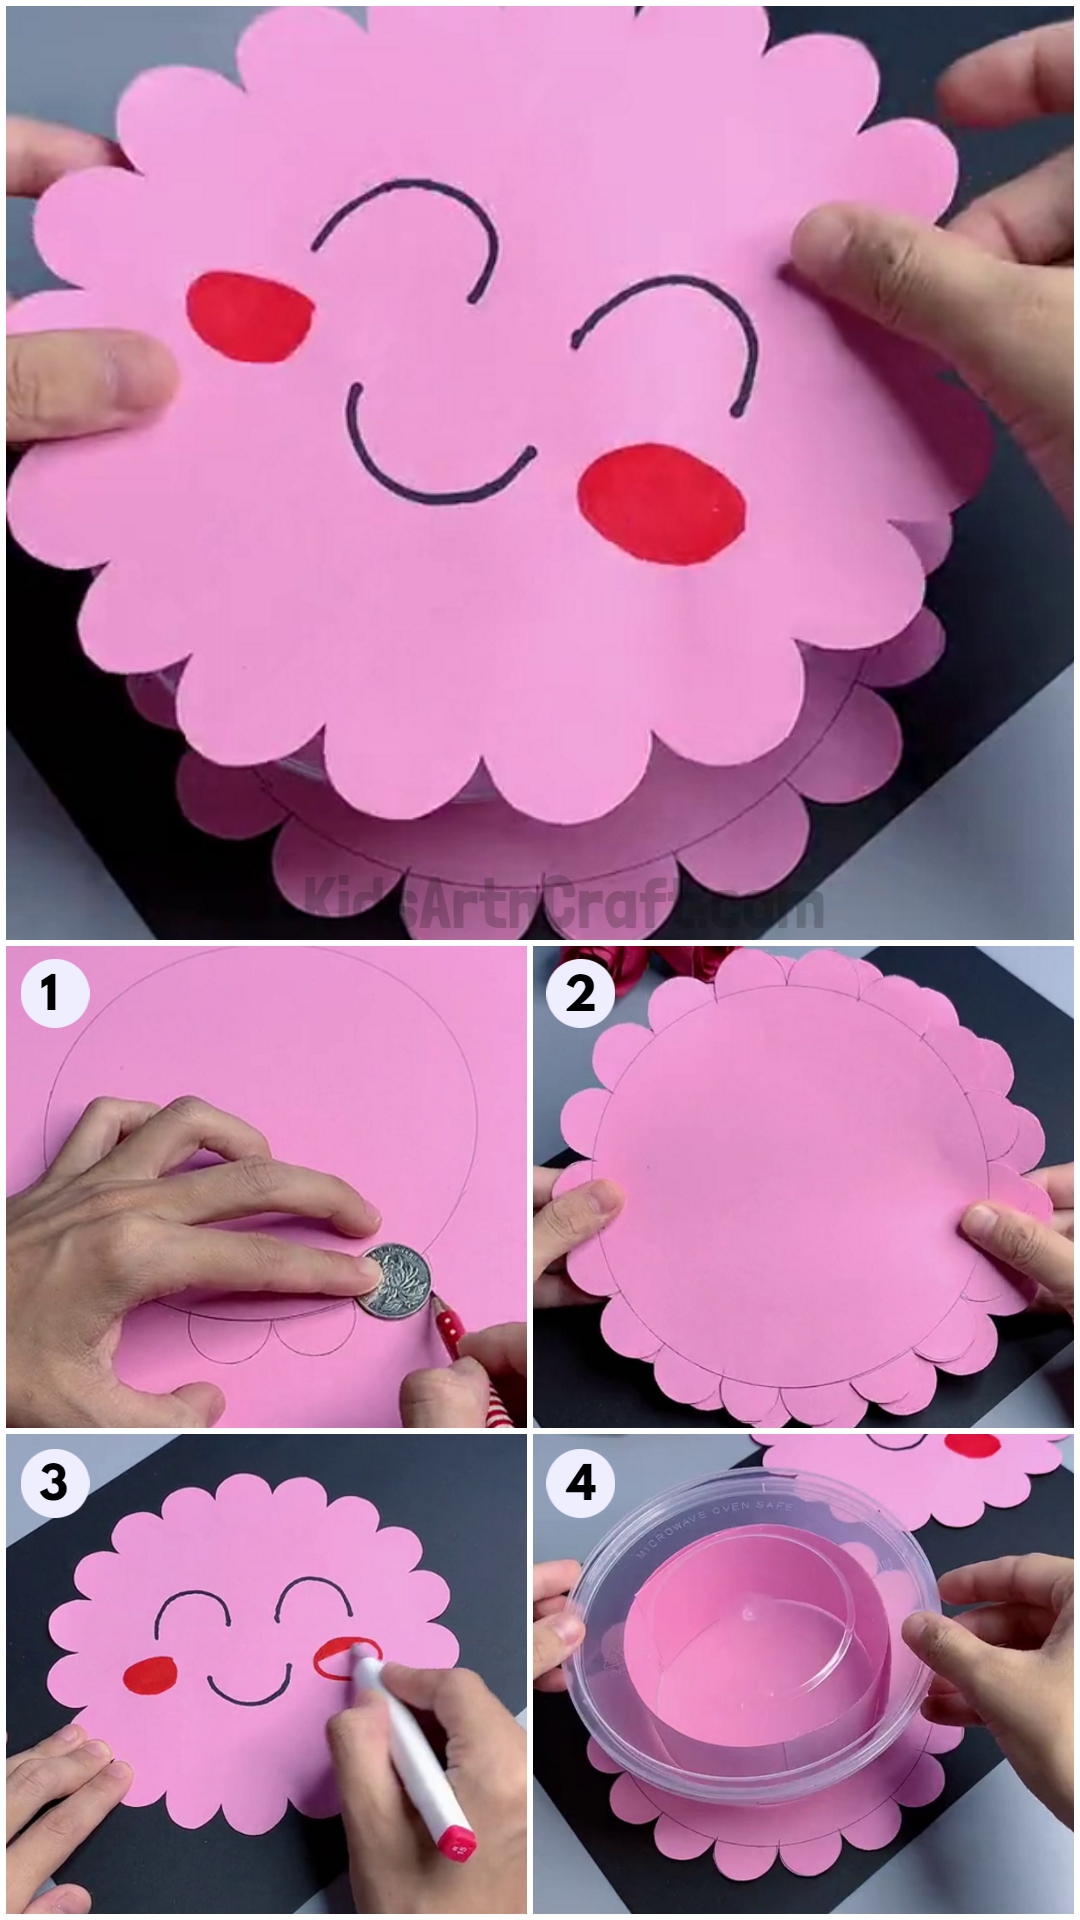  Easy Paper Craft Step by Step Tutorial For Kids